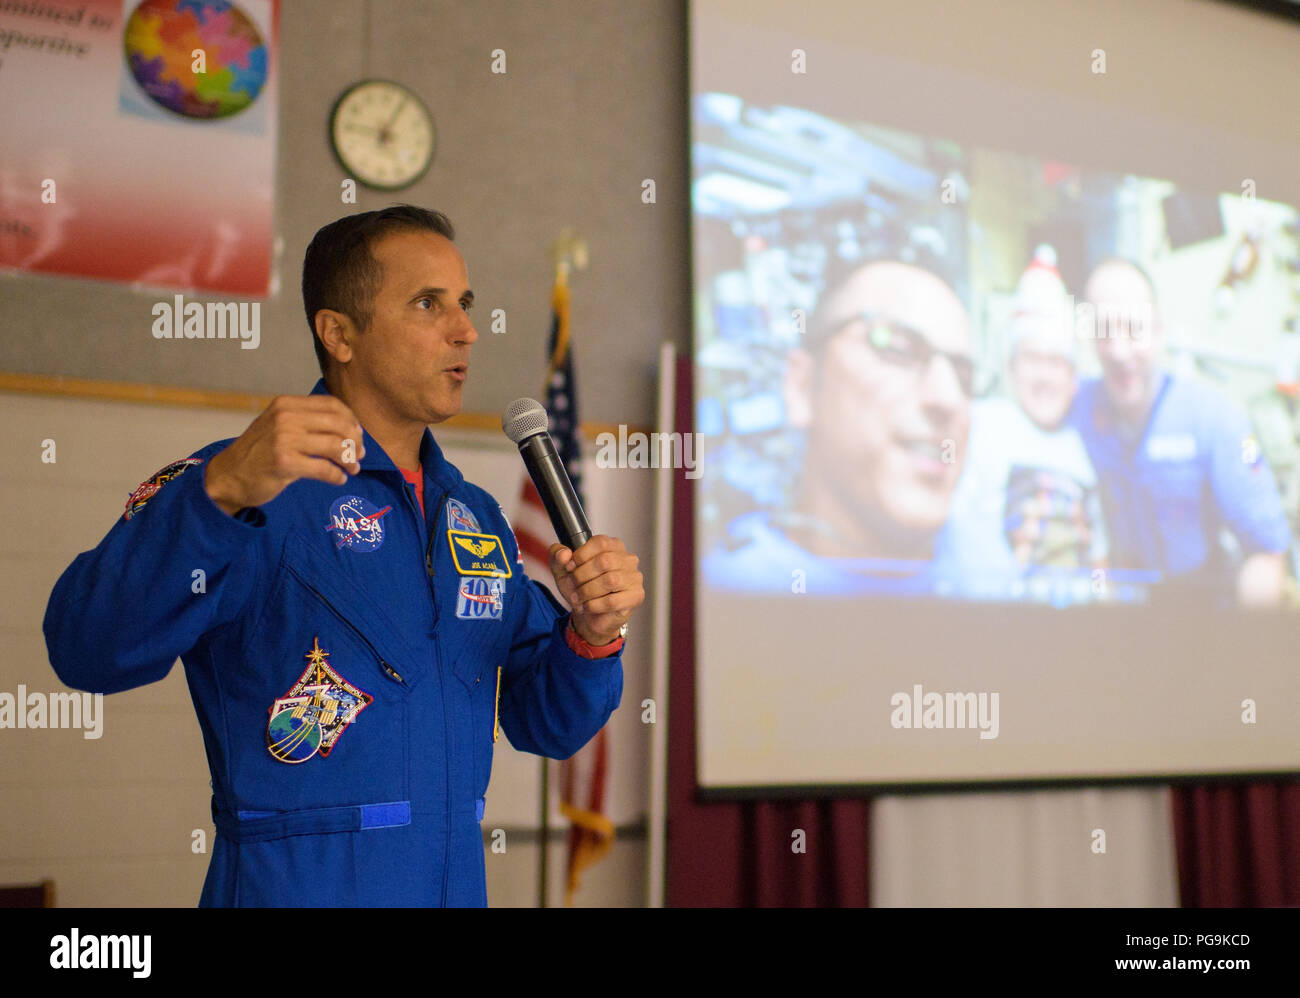 NASA astronaut Joe Acaba speaks about his time onboard the International Space Station during a presentation to students at Walt Whitman Middle School, Thursday, June 14, 2018 in Alexandria, Va. Acaba and astronaut Mark Vande Hei answered questions from the audience and spoke about their experiences aboard the International Space Station for 168 days as part of Expedition 53 and 54. Stock Photo